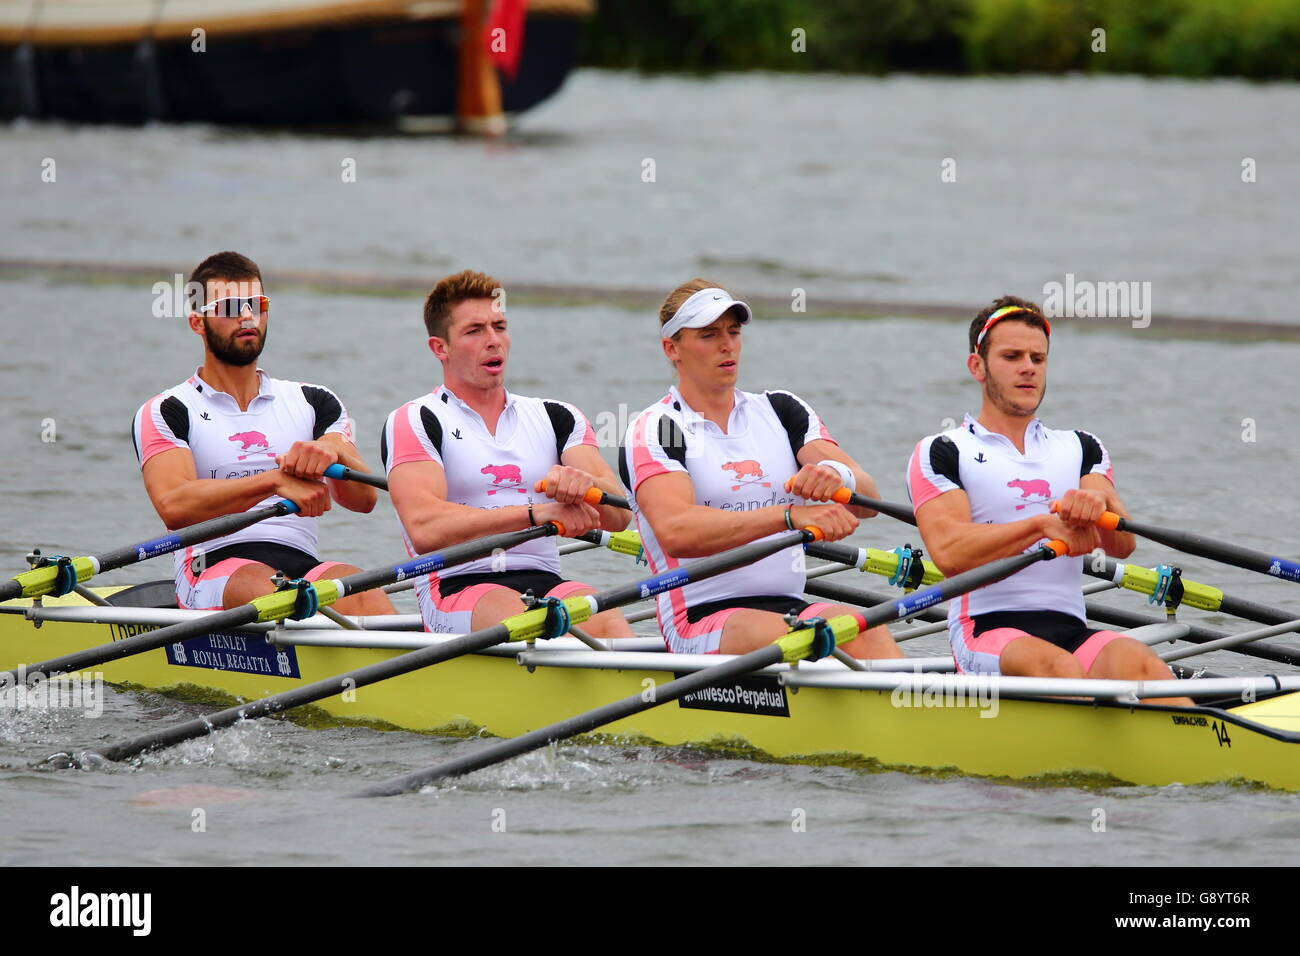 Rowers from all over the world came to the annual Henley Royal Regatta 2016. Leander club's men's quad Stock Photo